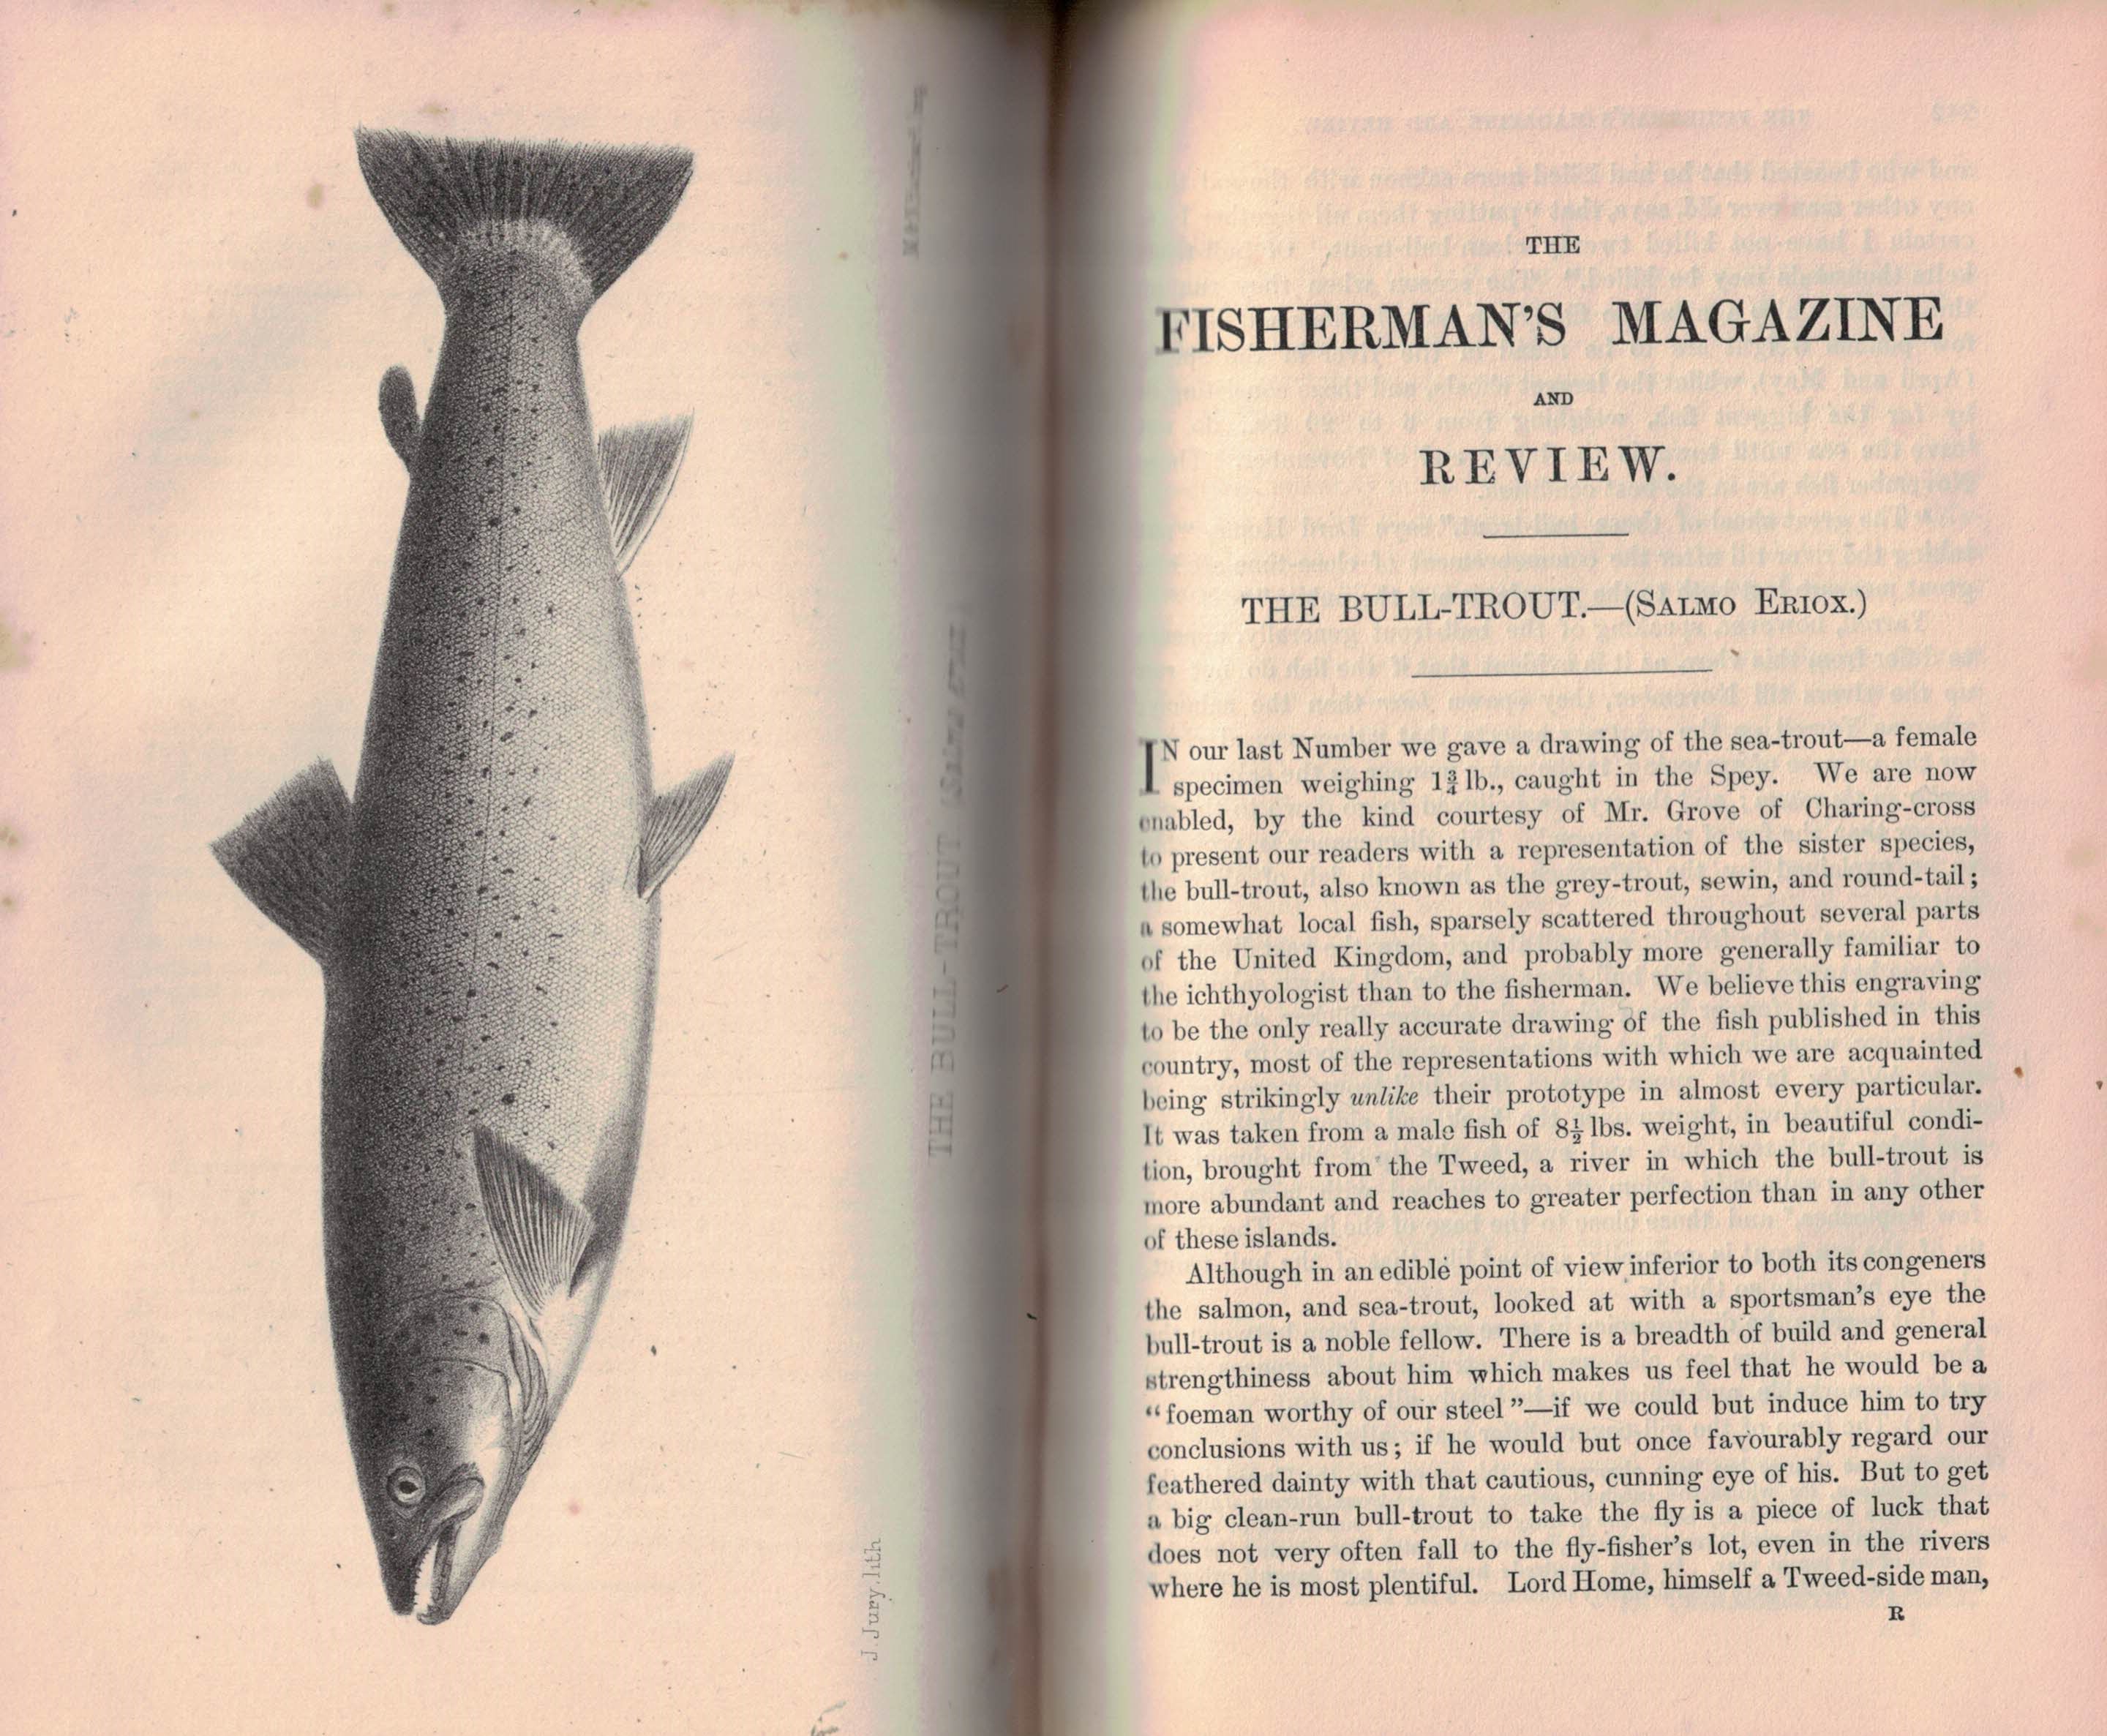 The Fisherman's Magazine and Review. Vol. I. April to December 1864.